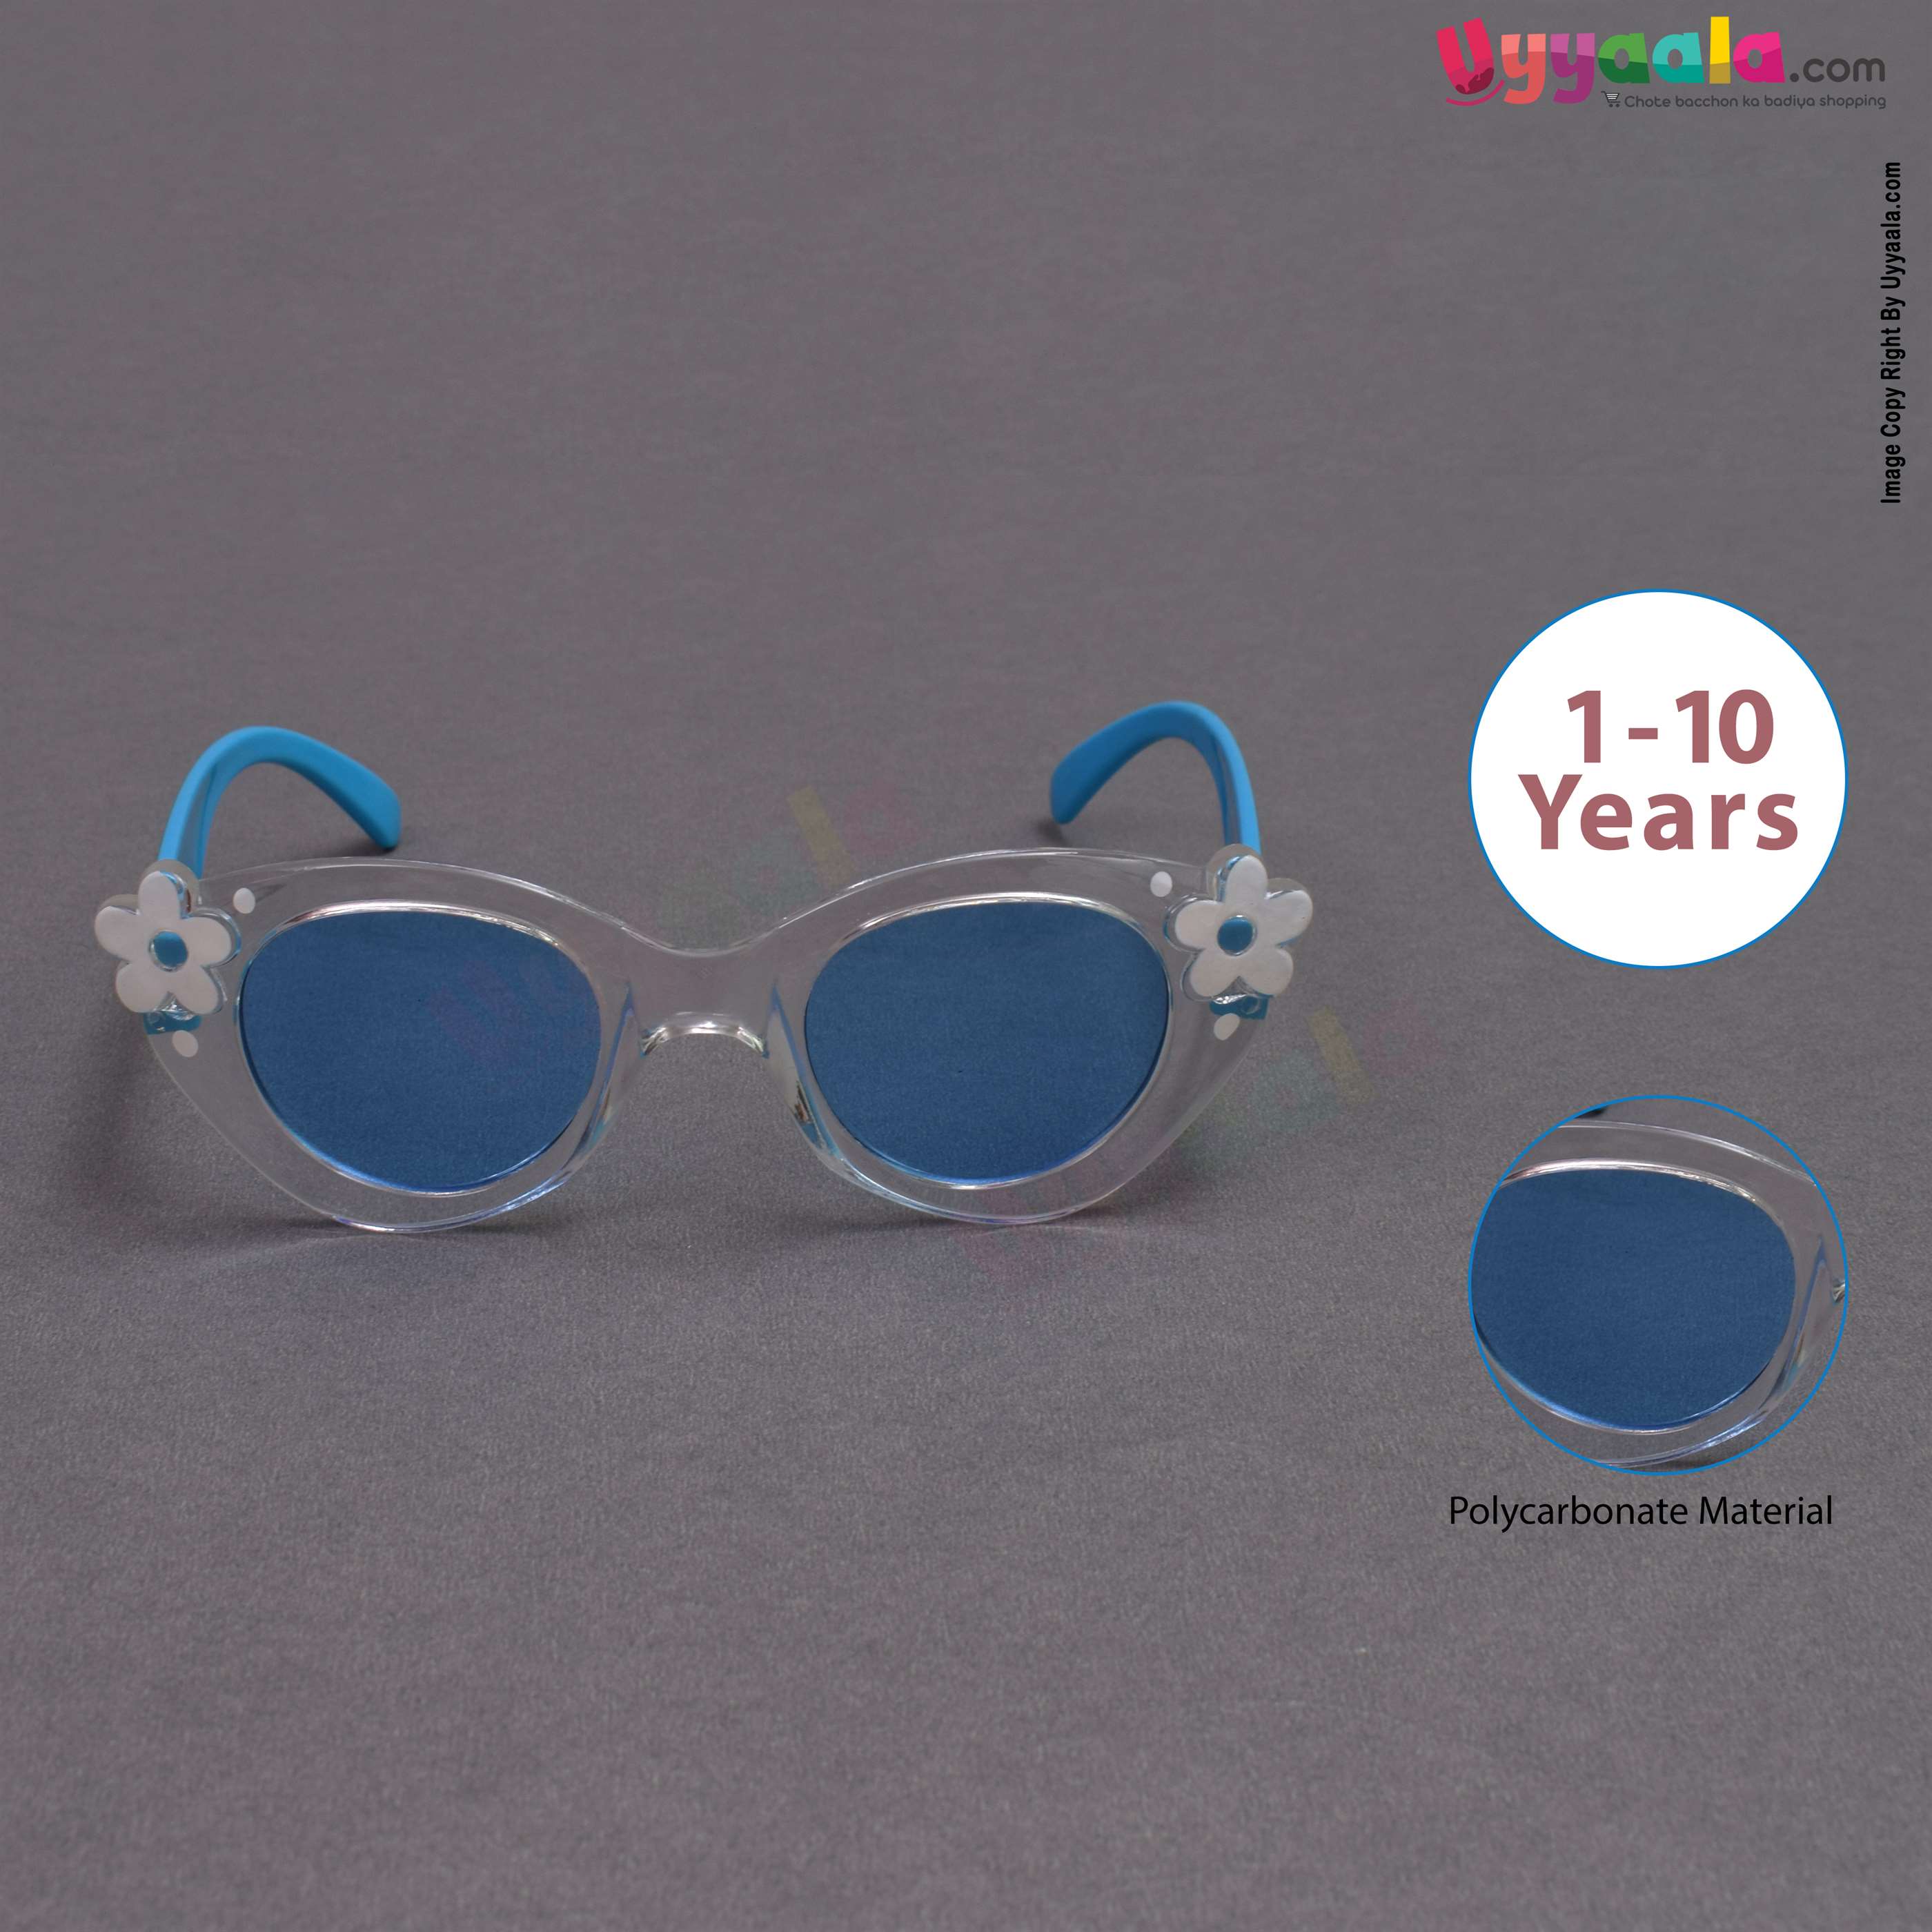 Stylish cat eye shaped blue shade sunglasses for kids - sky blue with flower patch, 1 - 10 years